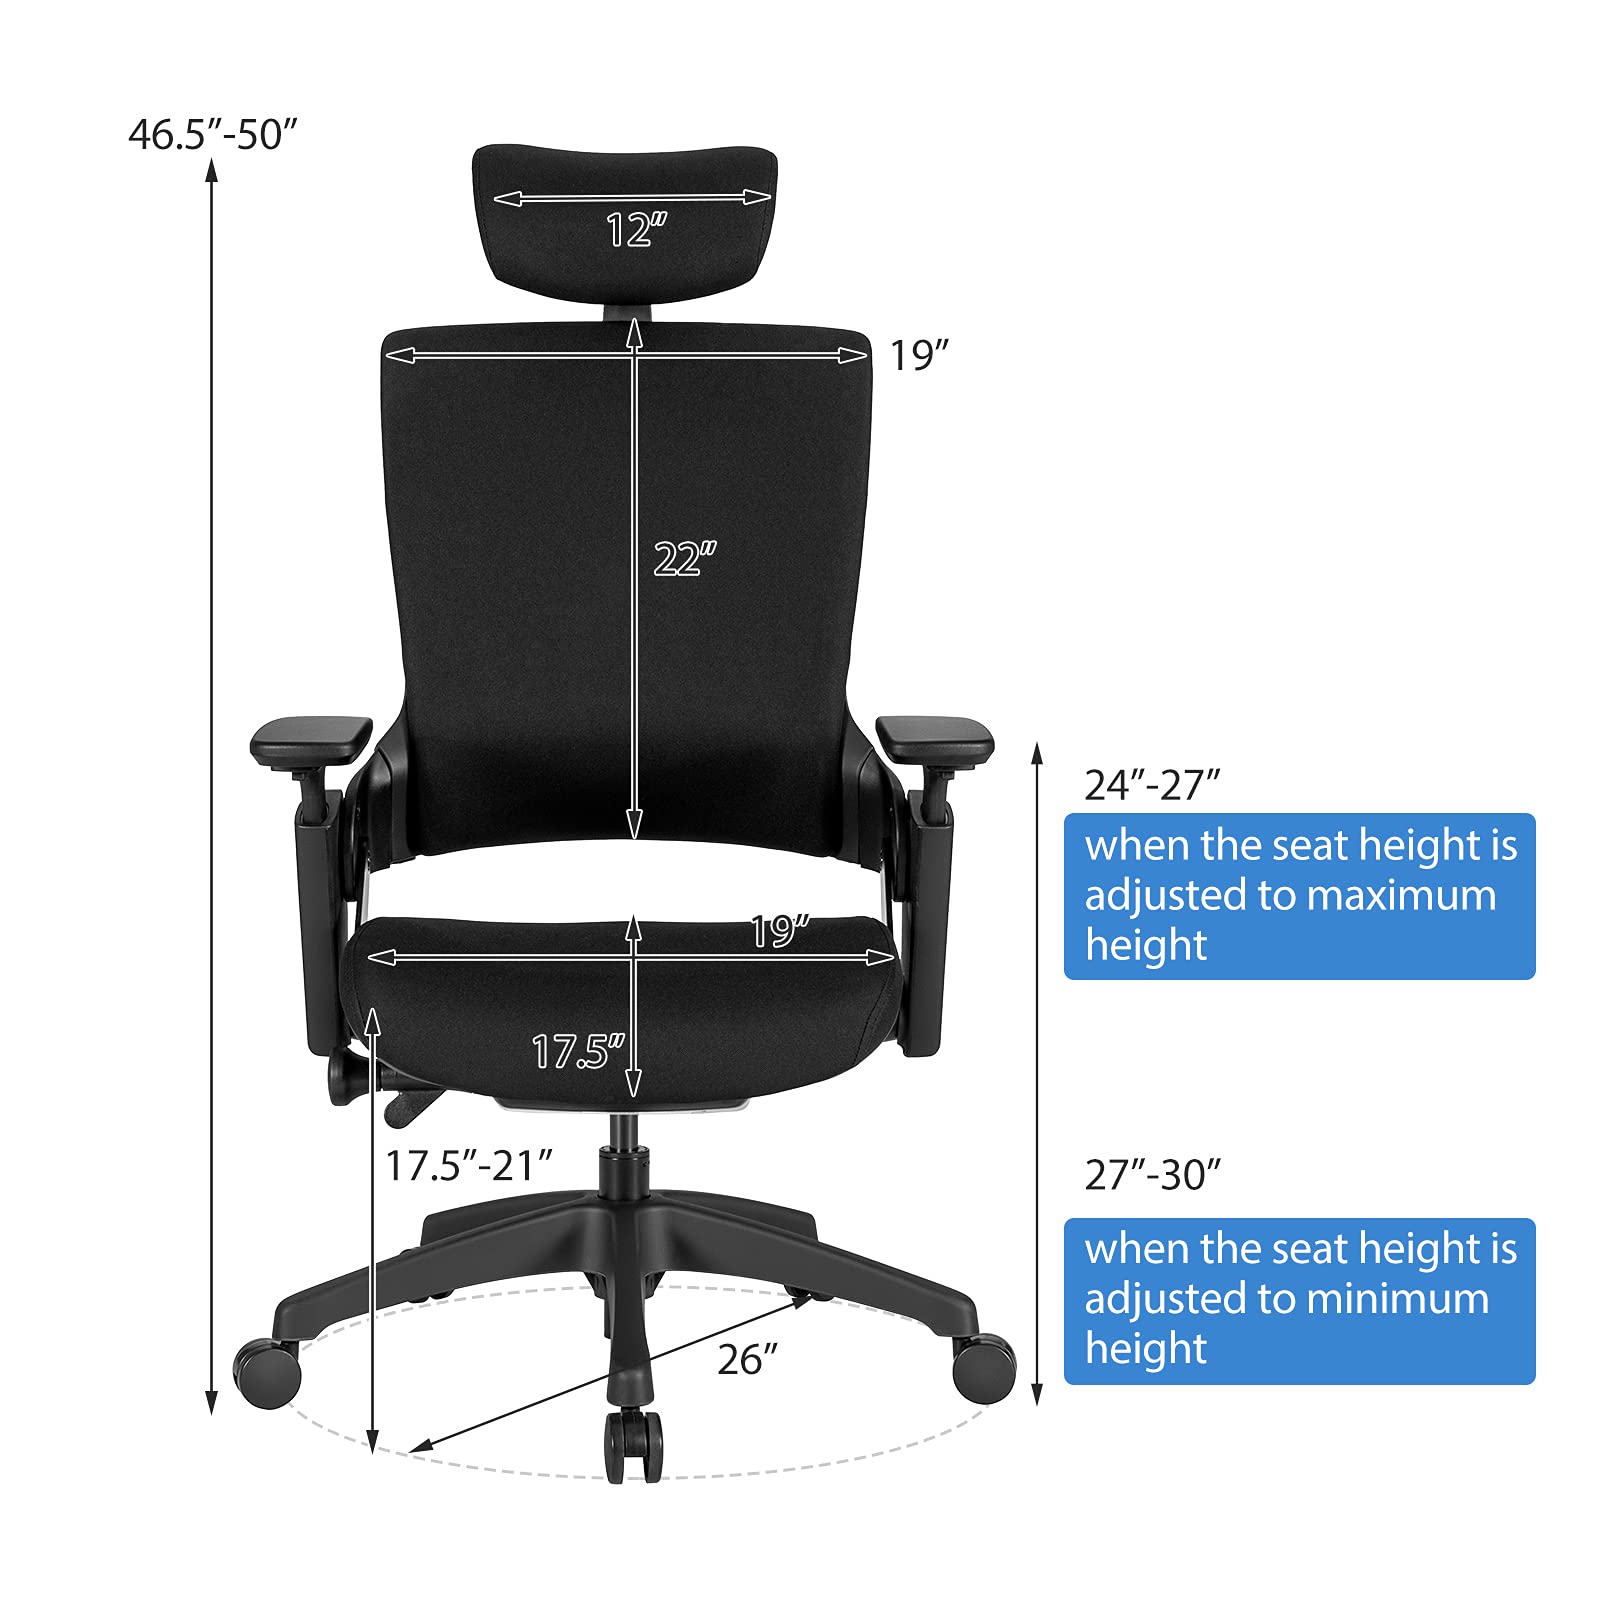 Giantex Home Office Desk Chair Swivel Executive Chair with Ergonomic High Back